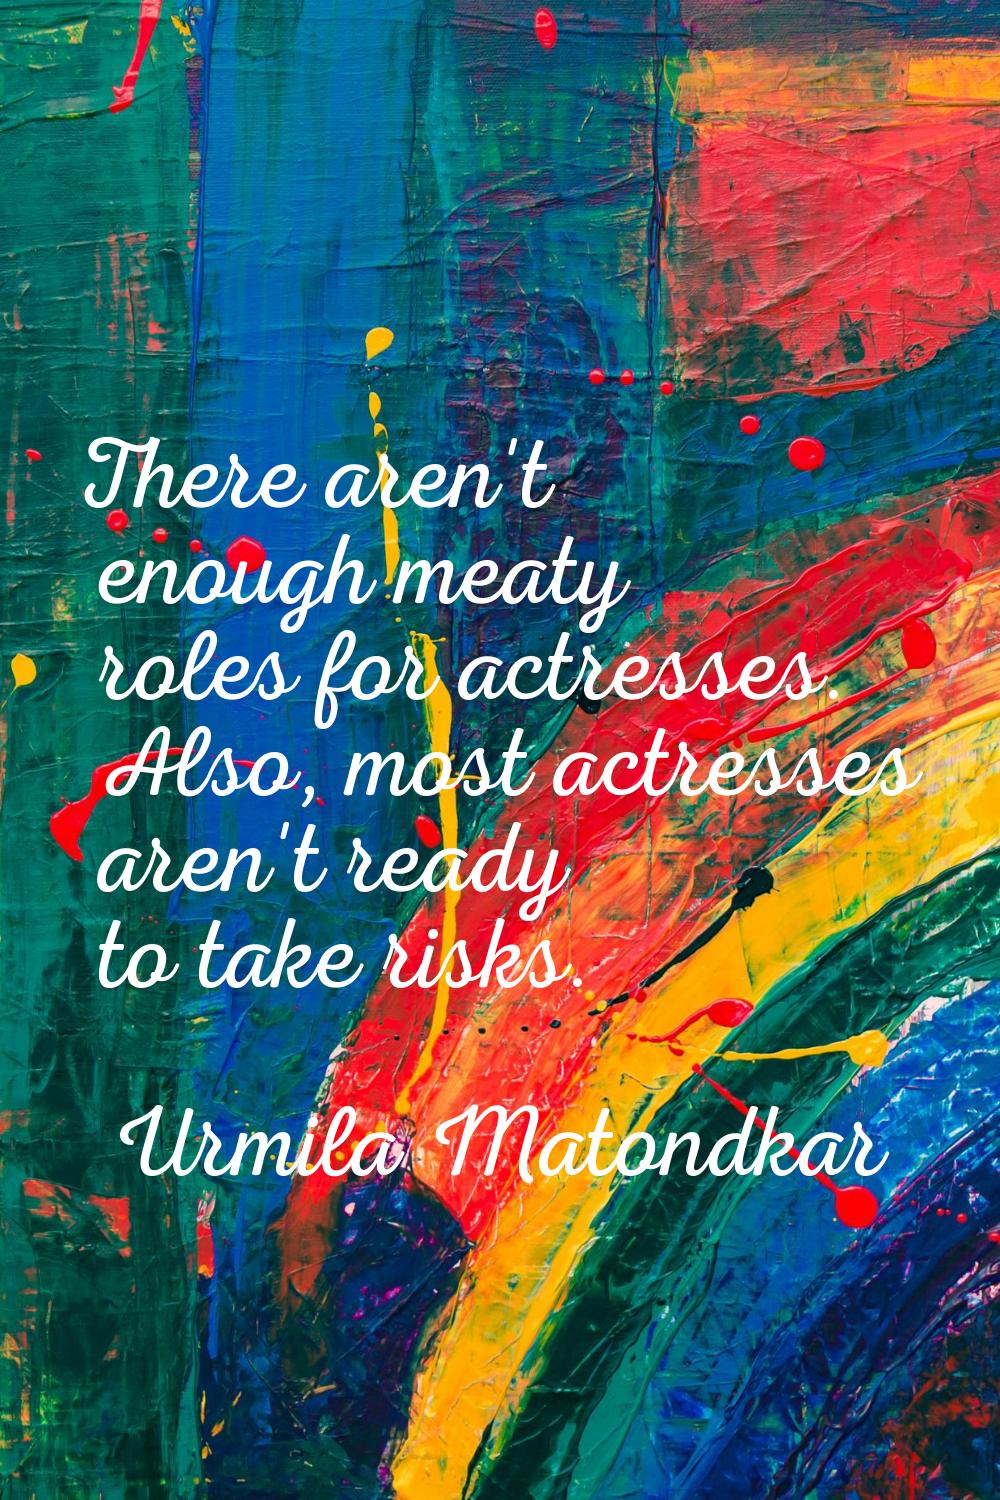 There aren't enough meaty roles for actresses. Also, most actresses aren't ready to take risks.